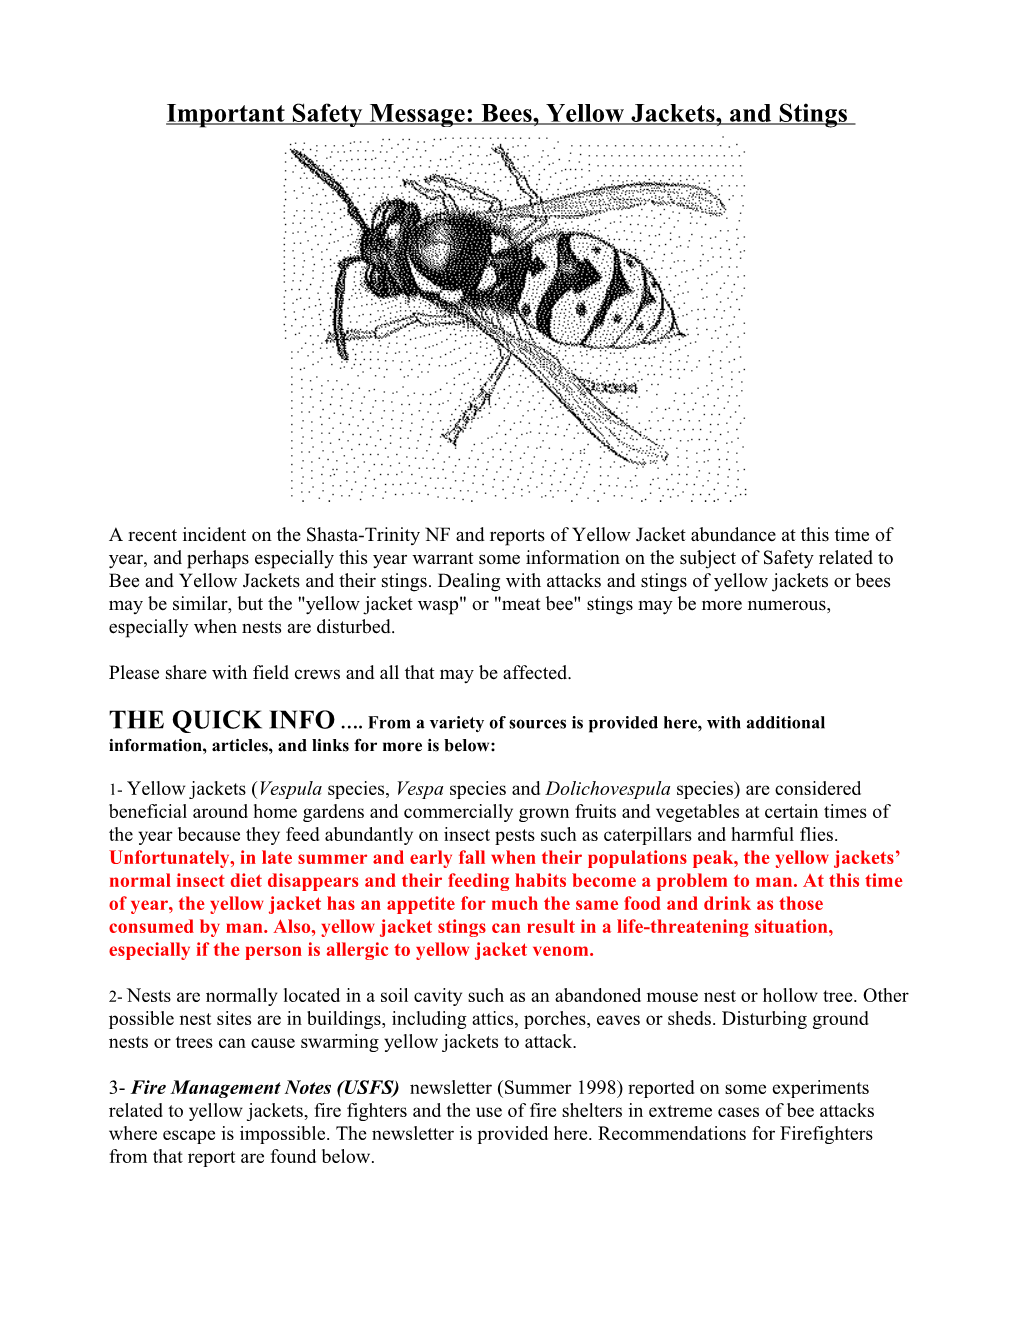 Important Message Bees, Yellow Jackets, Meat Bee Stings